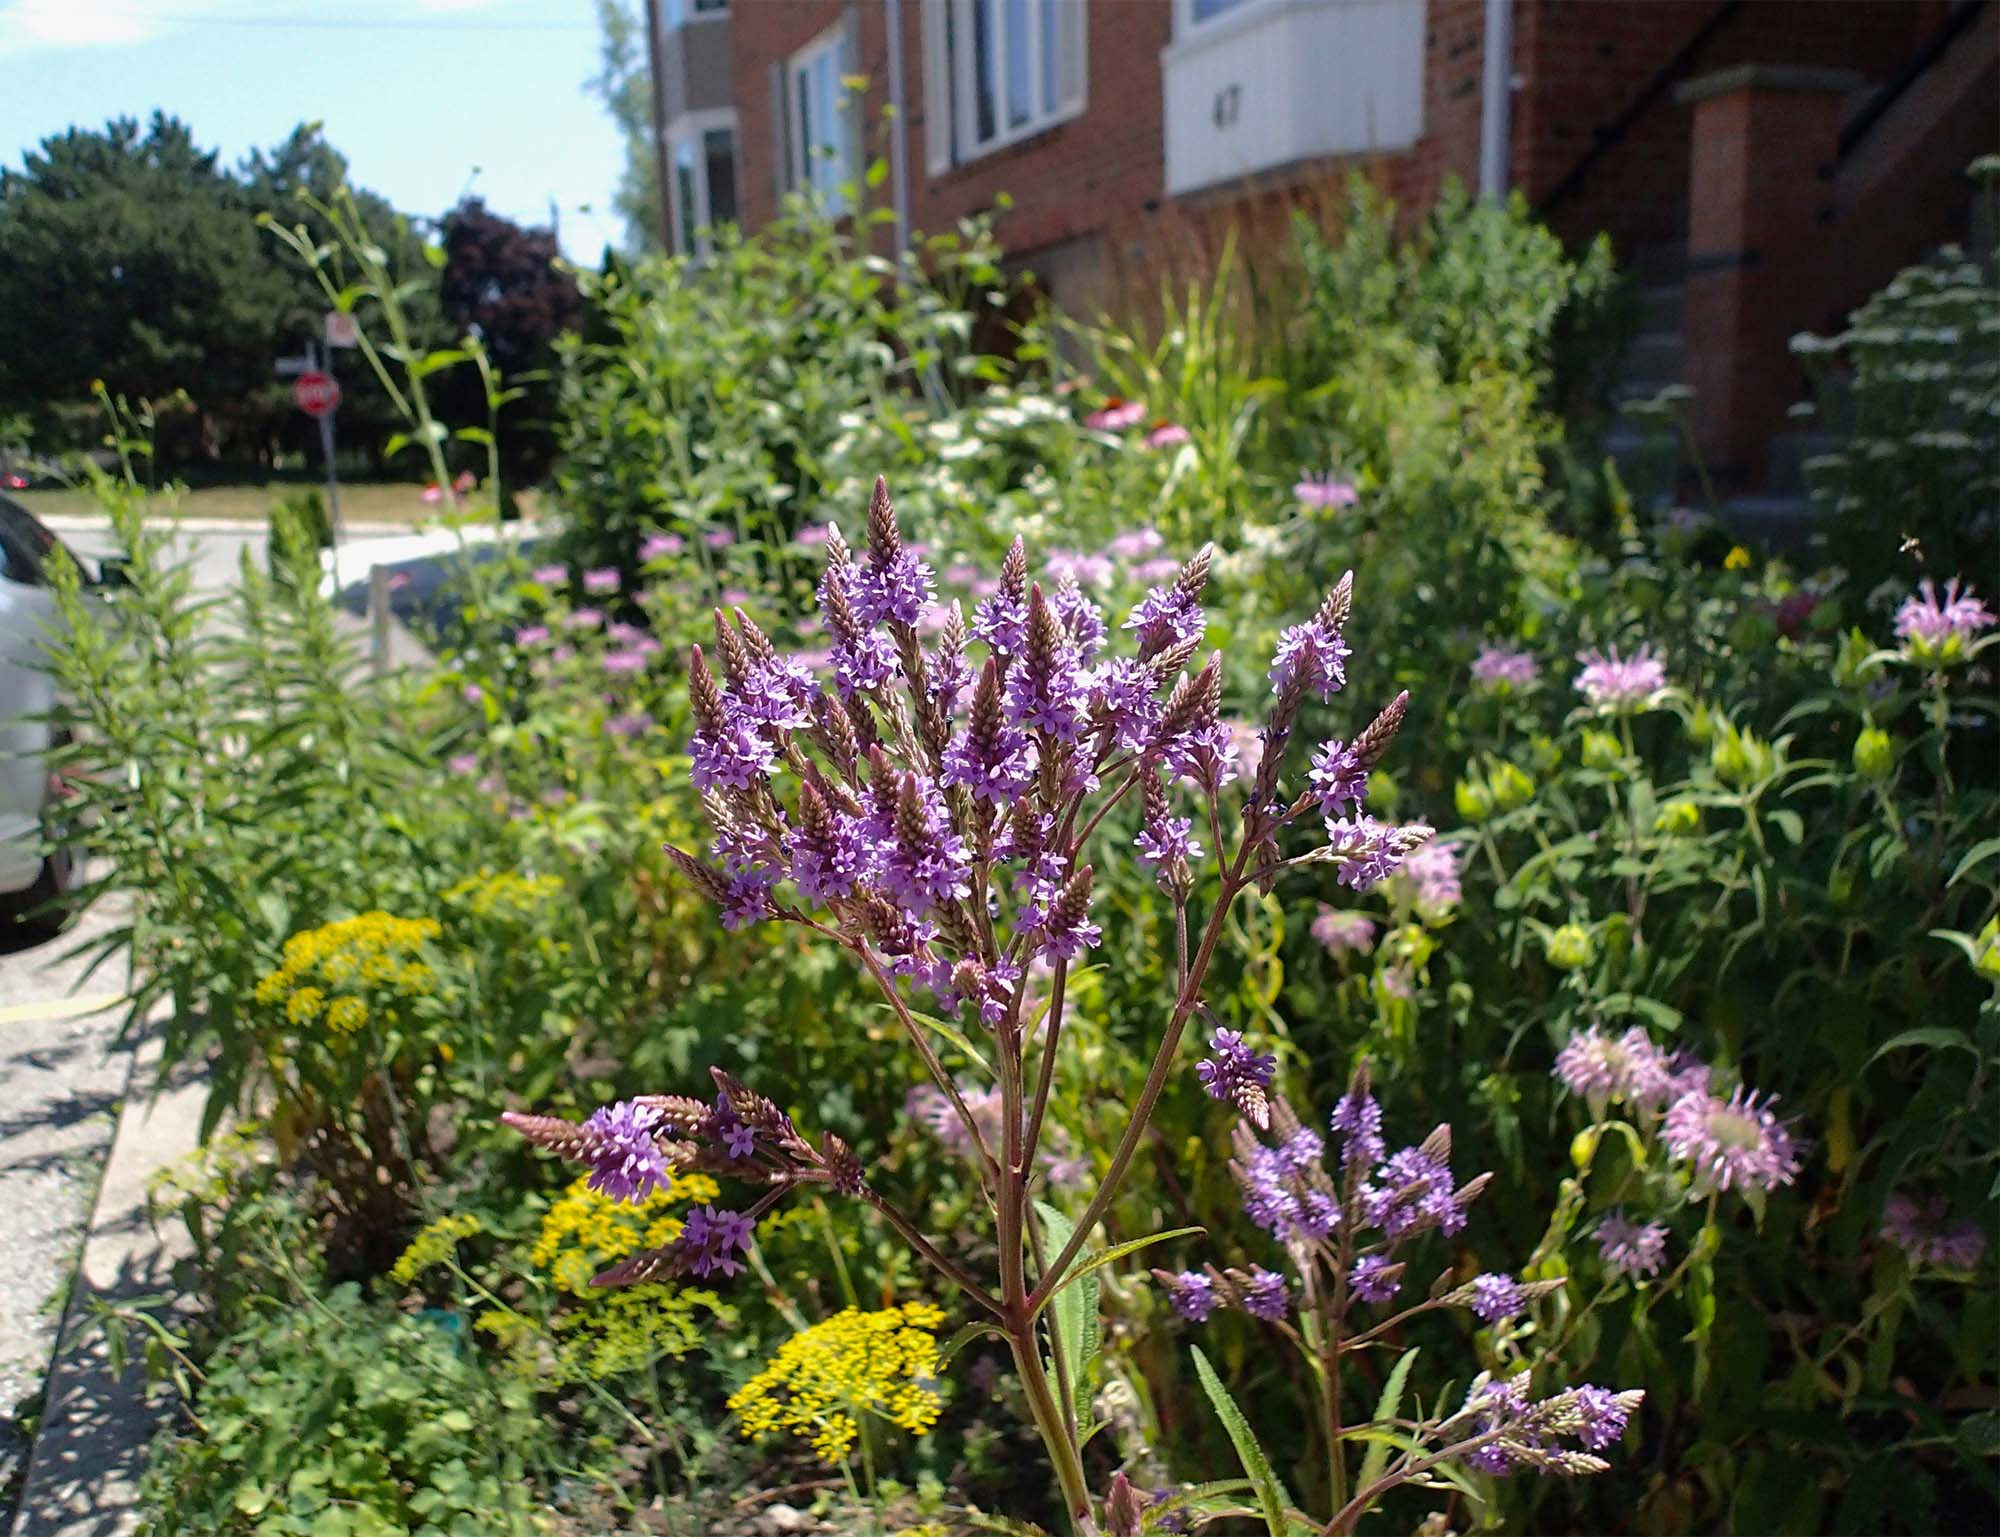 A purple flowering plant surrounded by other plants in an urban front yard